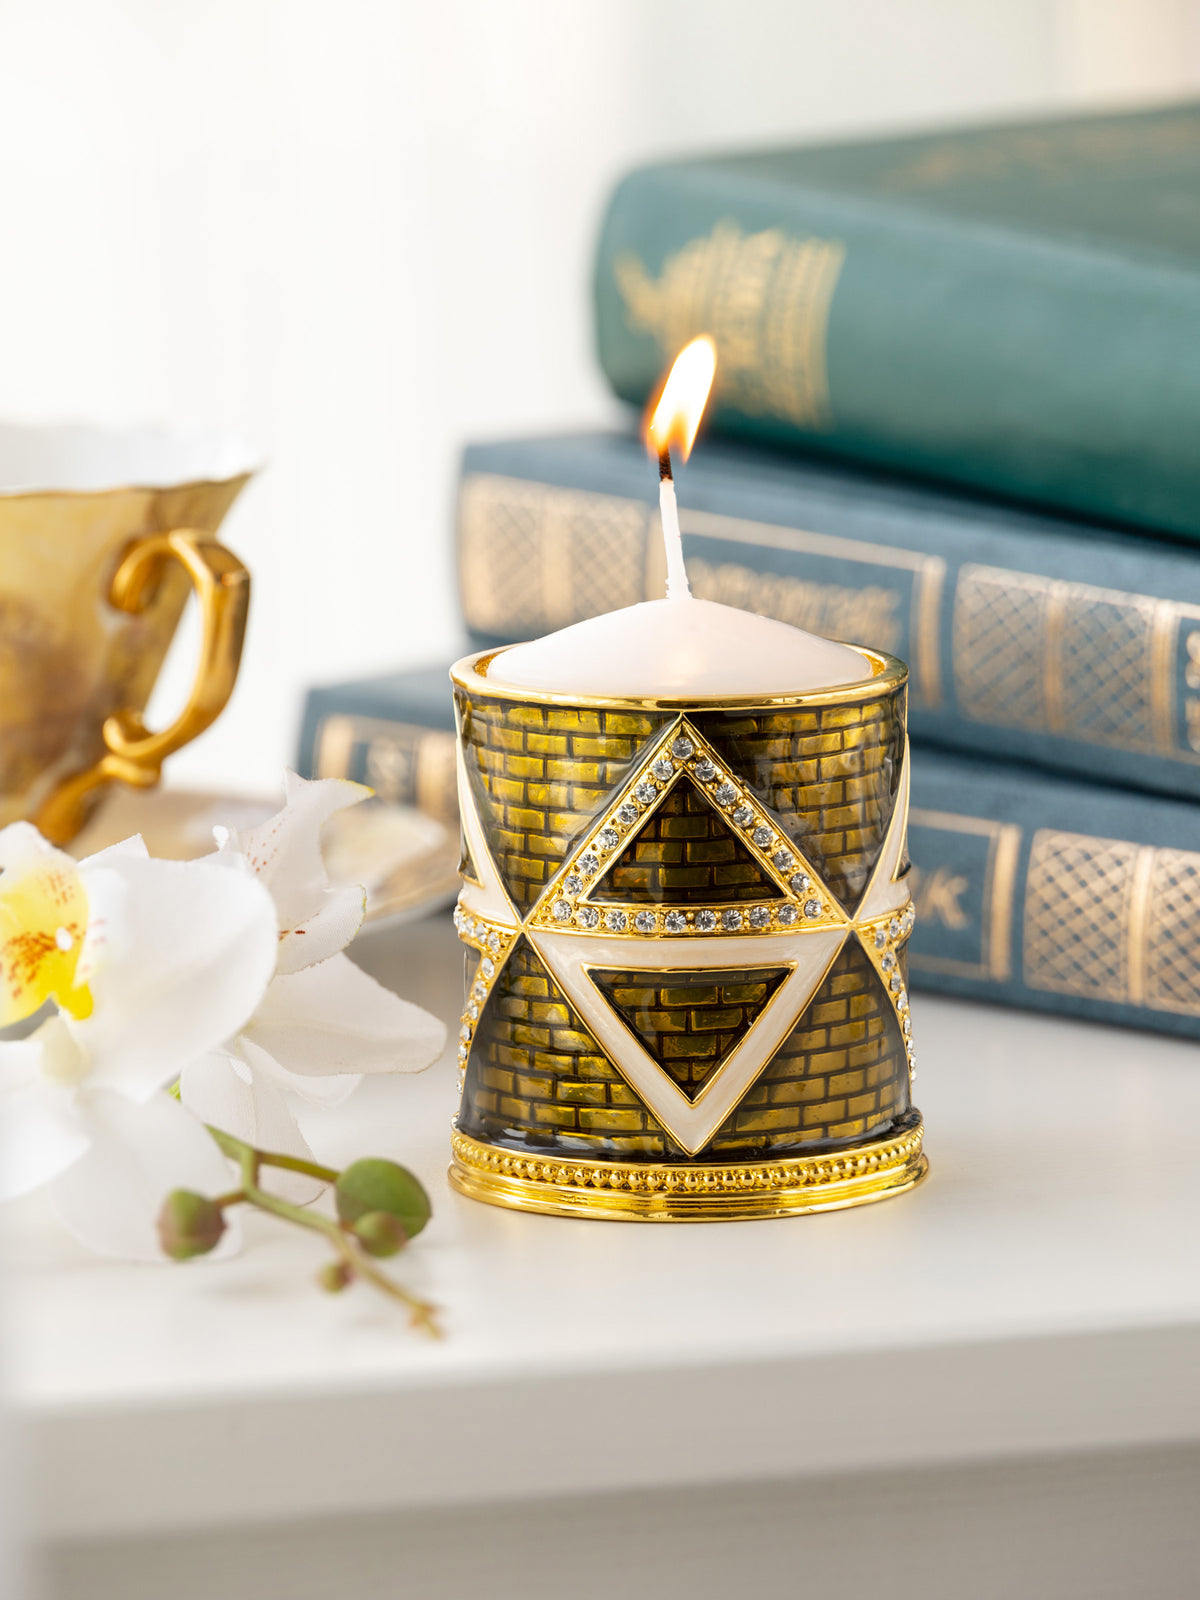 Golden Brown Decorated Candle Holder with Triangles Pattern